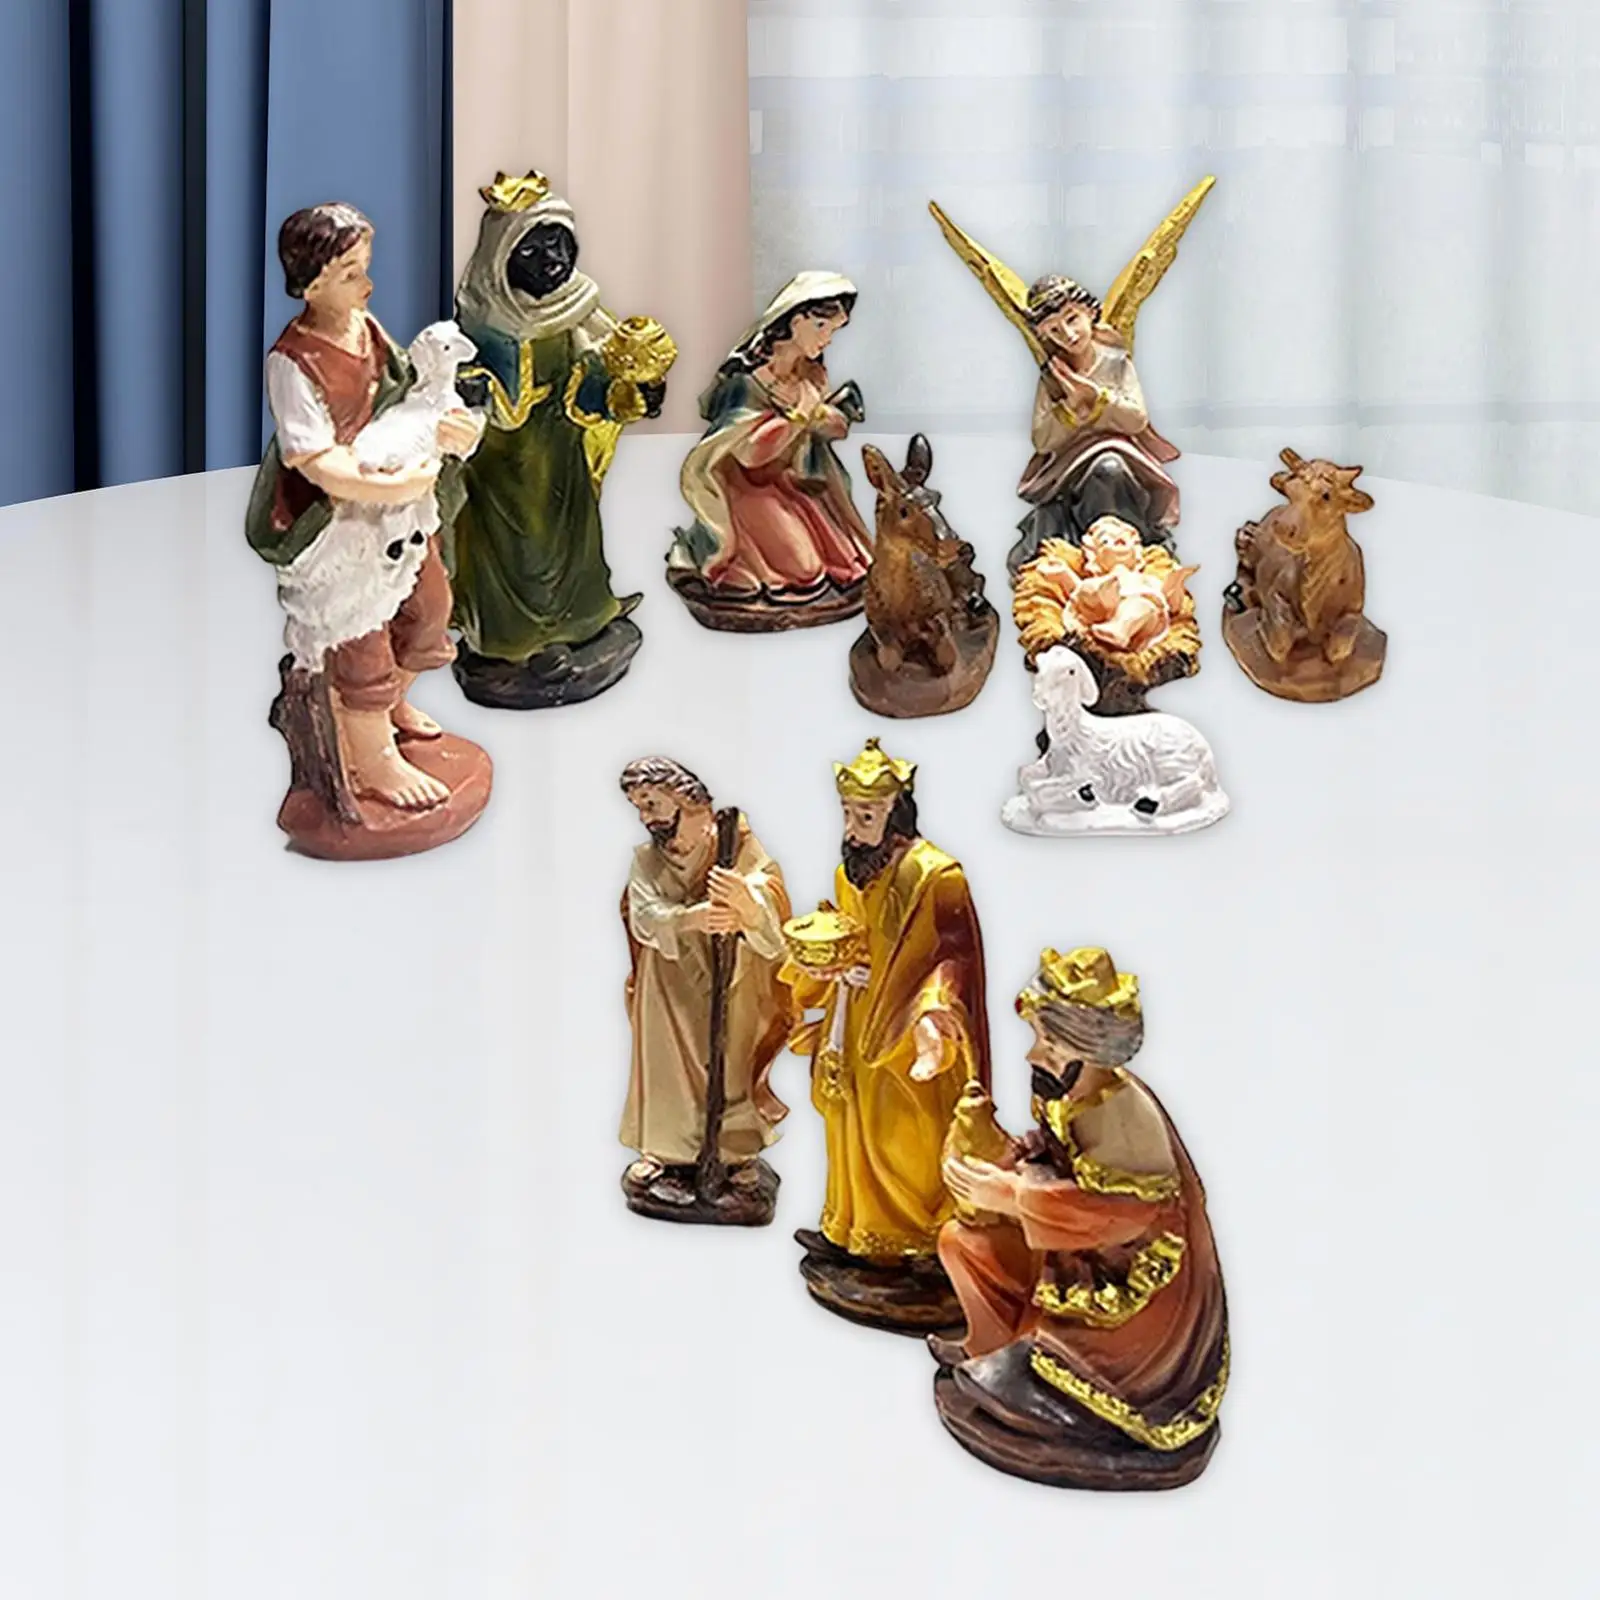 Nativity Figurine Christian Religious Sculpture Ornament Holy Family Birth of Jesus Statue Set for Office Home Xmas Gifts